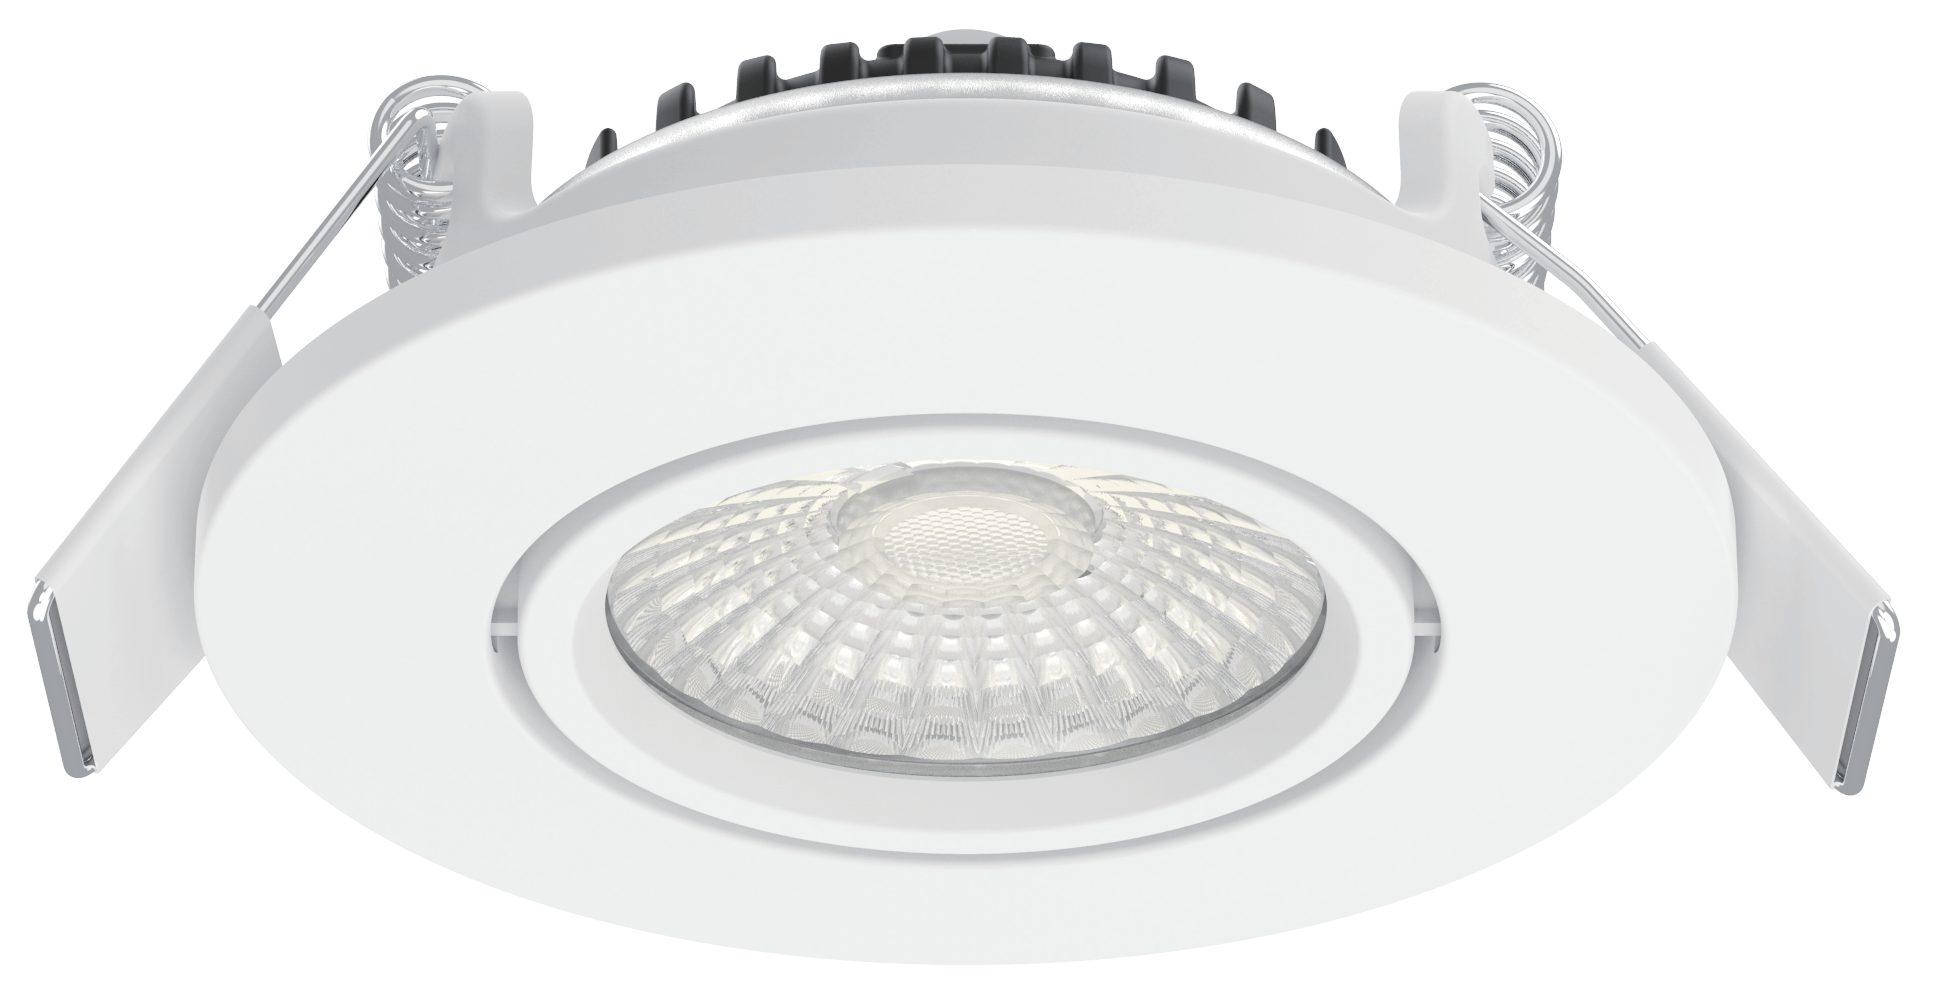 Hot Sale for Ic Rated Led Downlight - Edos 6W fixed/orientable led downlight 5RS149 – Radiant Lighting